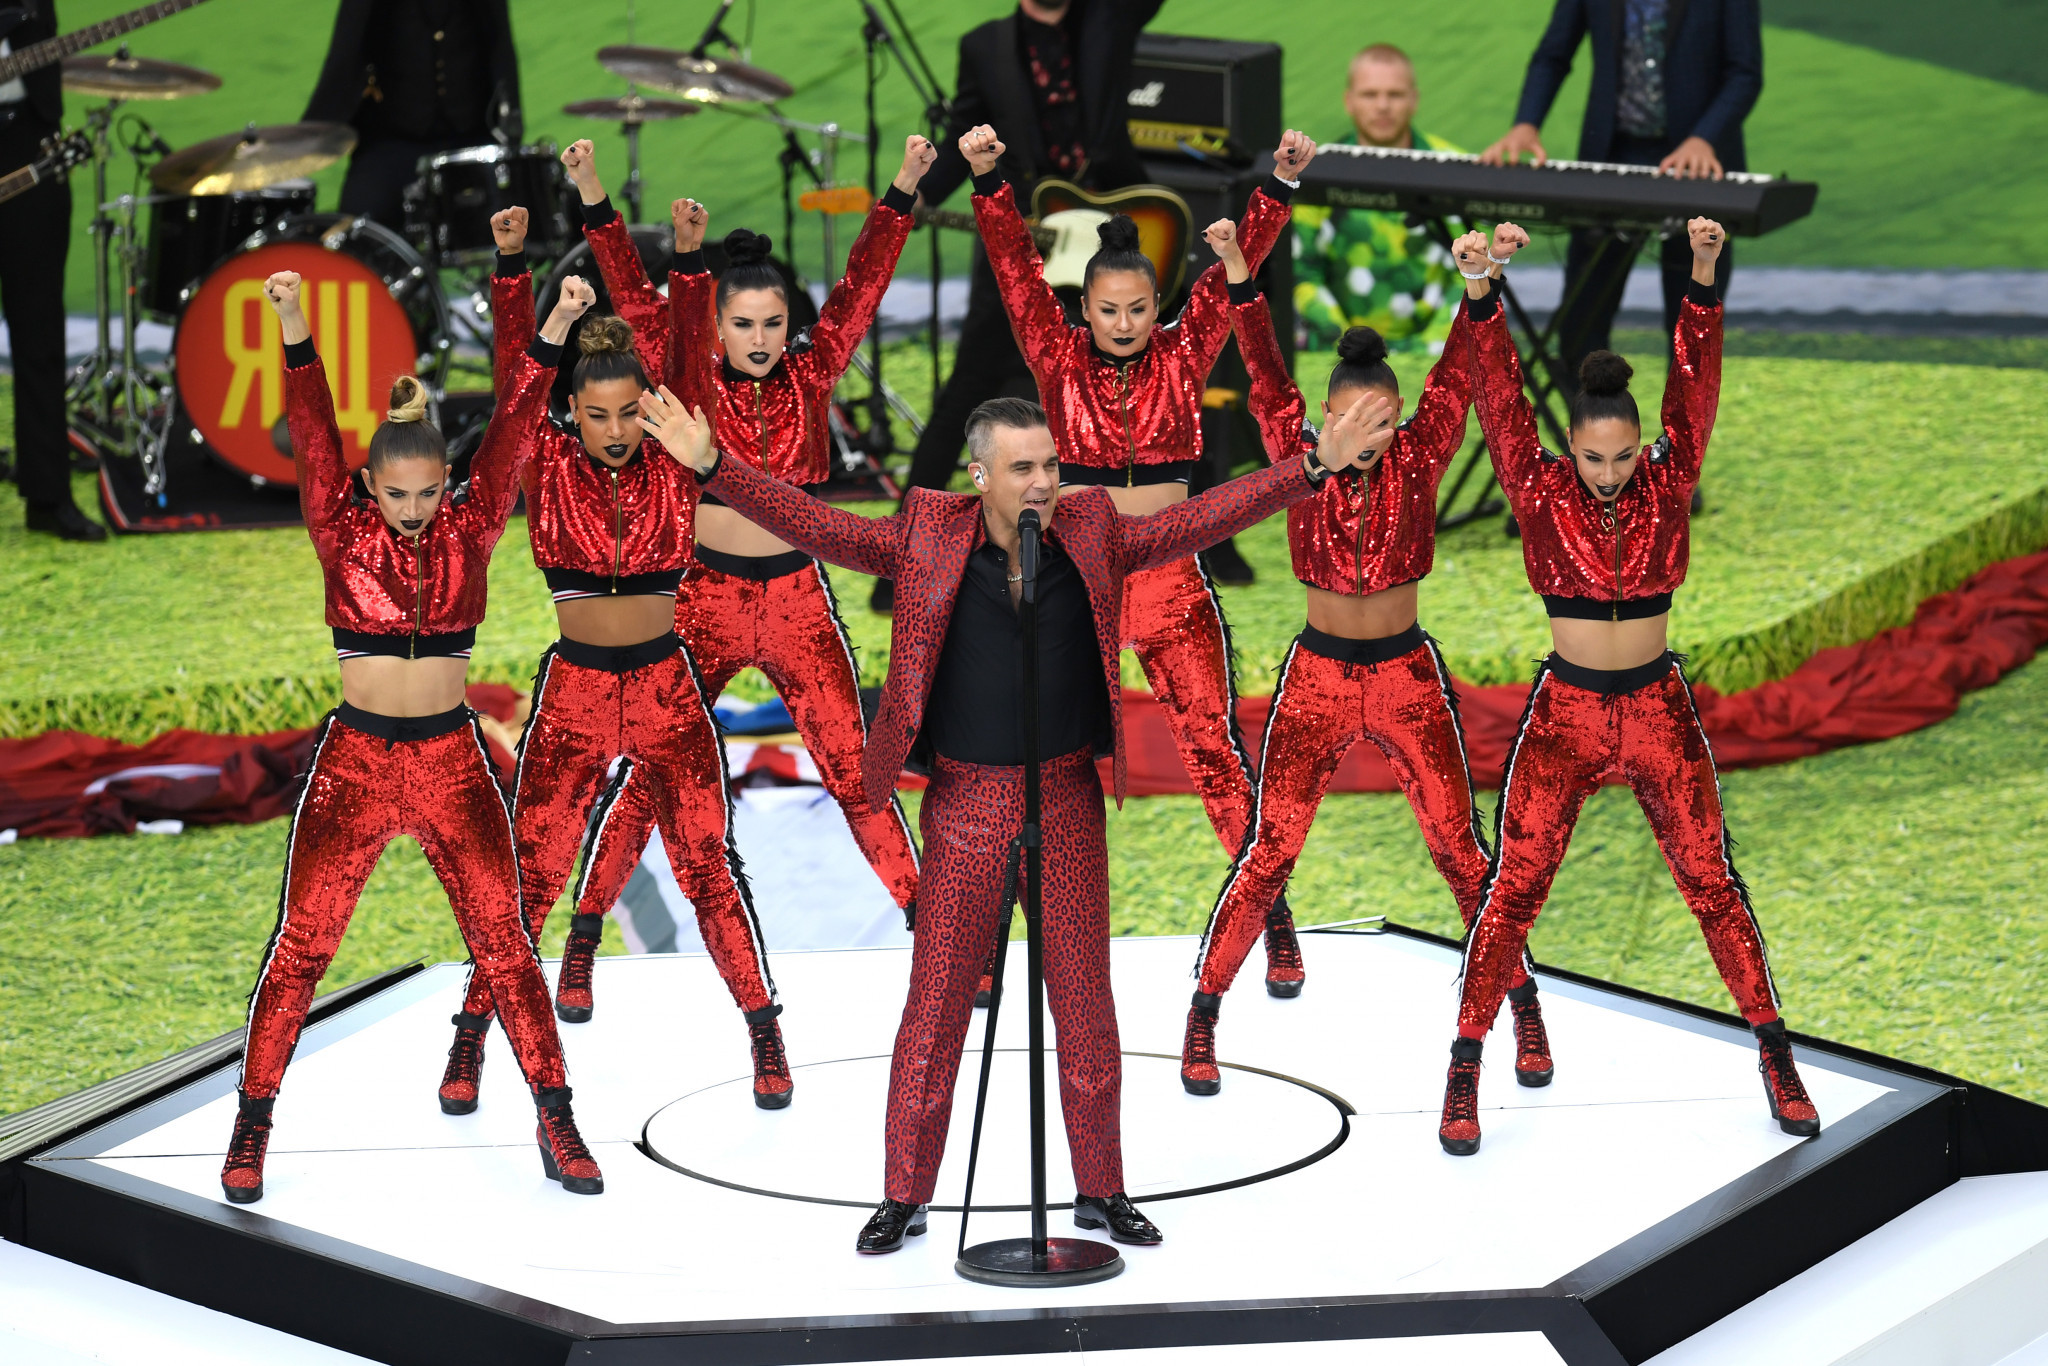 Robbie Williams had top billing at the Opening Ceremony of the 2018 World Cup before Russia beat Saudi Arabia 5-0 ©Getty Images